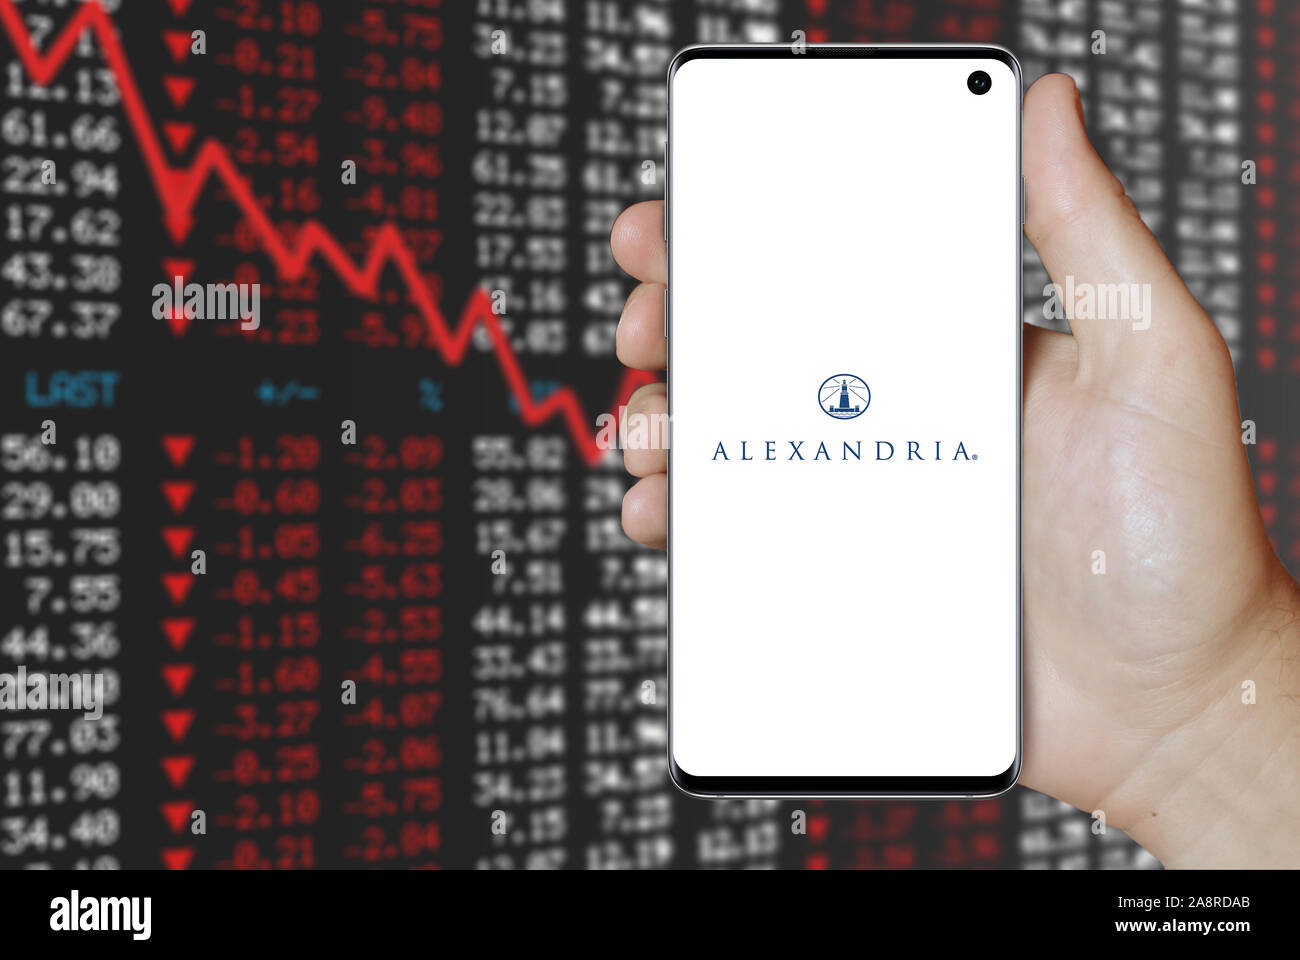 Logo of public company Alexandria Real Estate Equities displayed on a smartphone. Negative stock market background. Credit: PIXDUCE Stock Photo